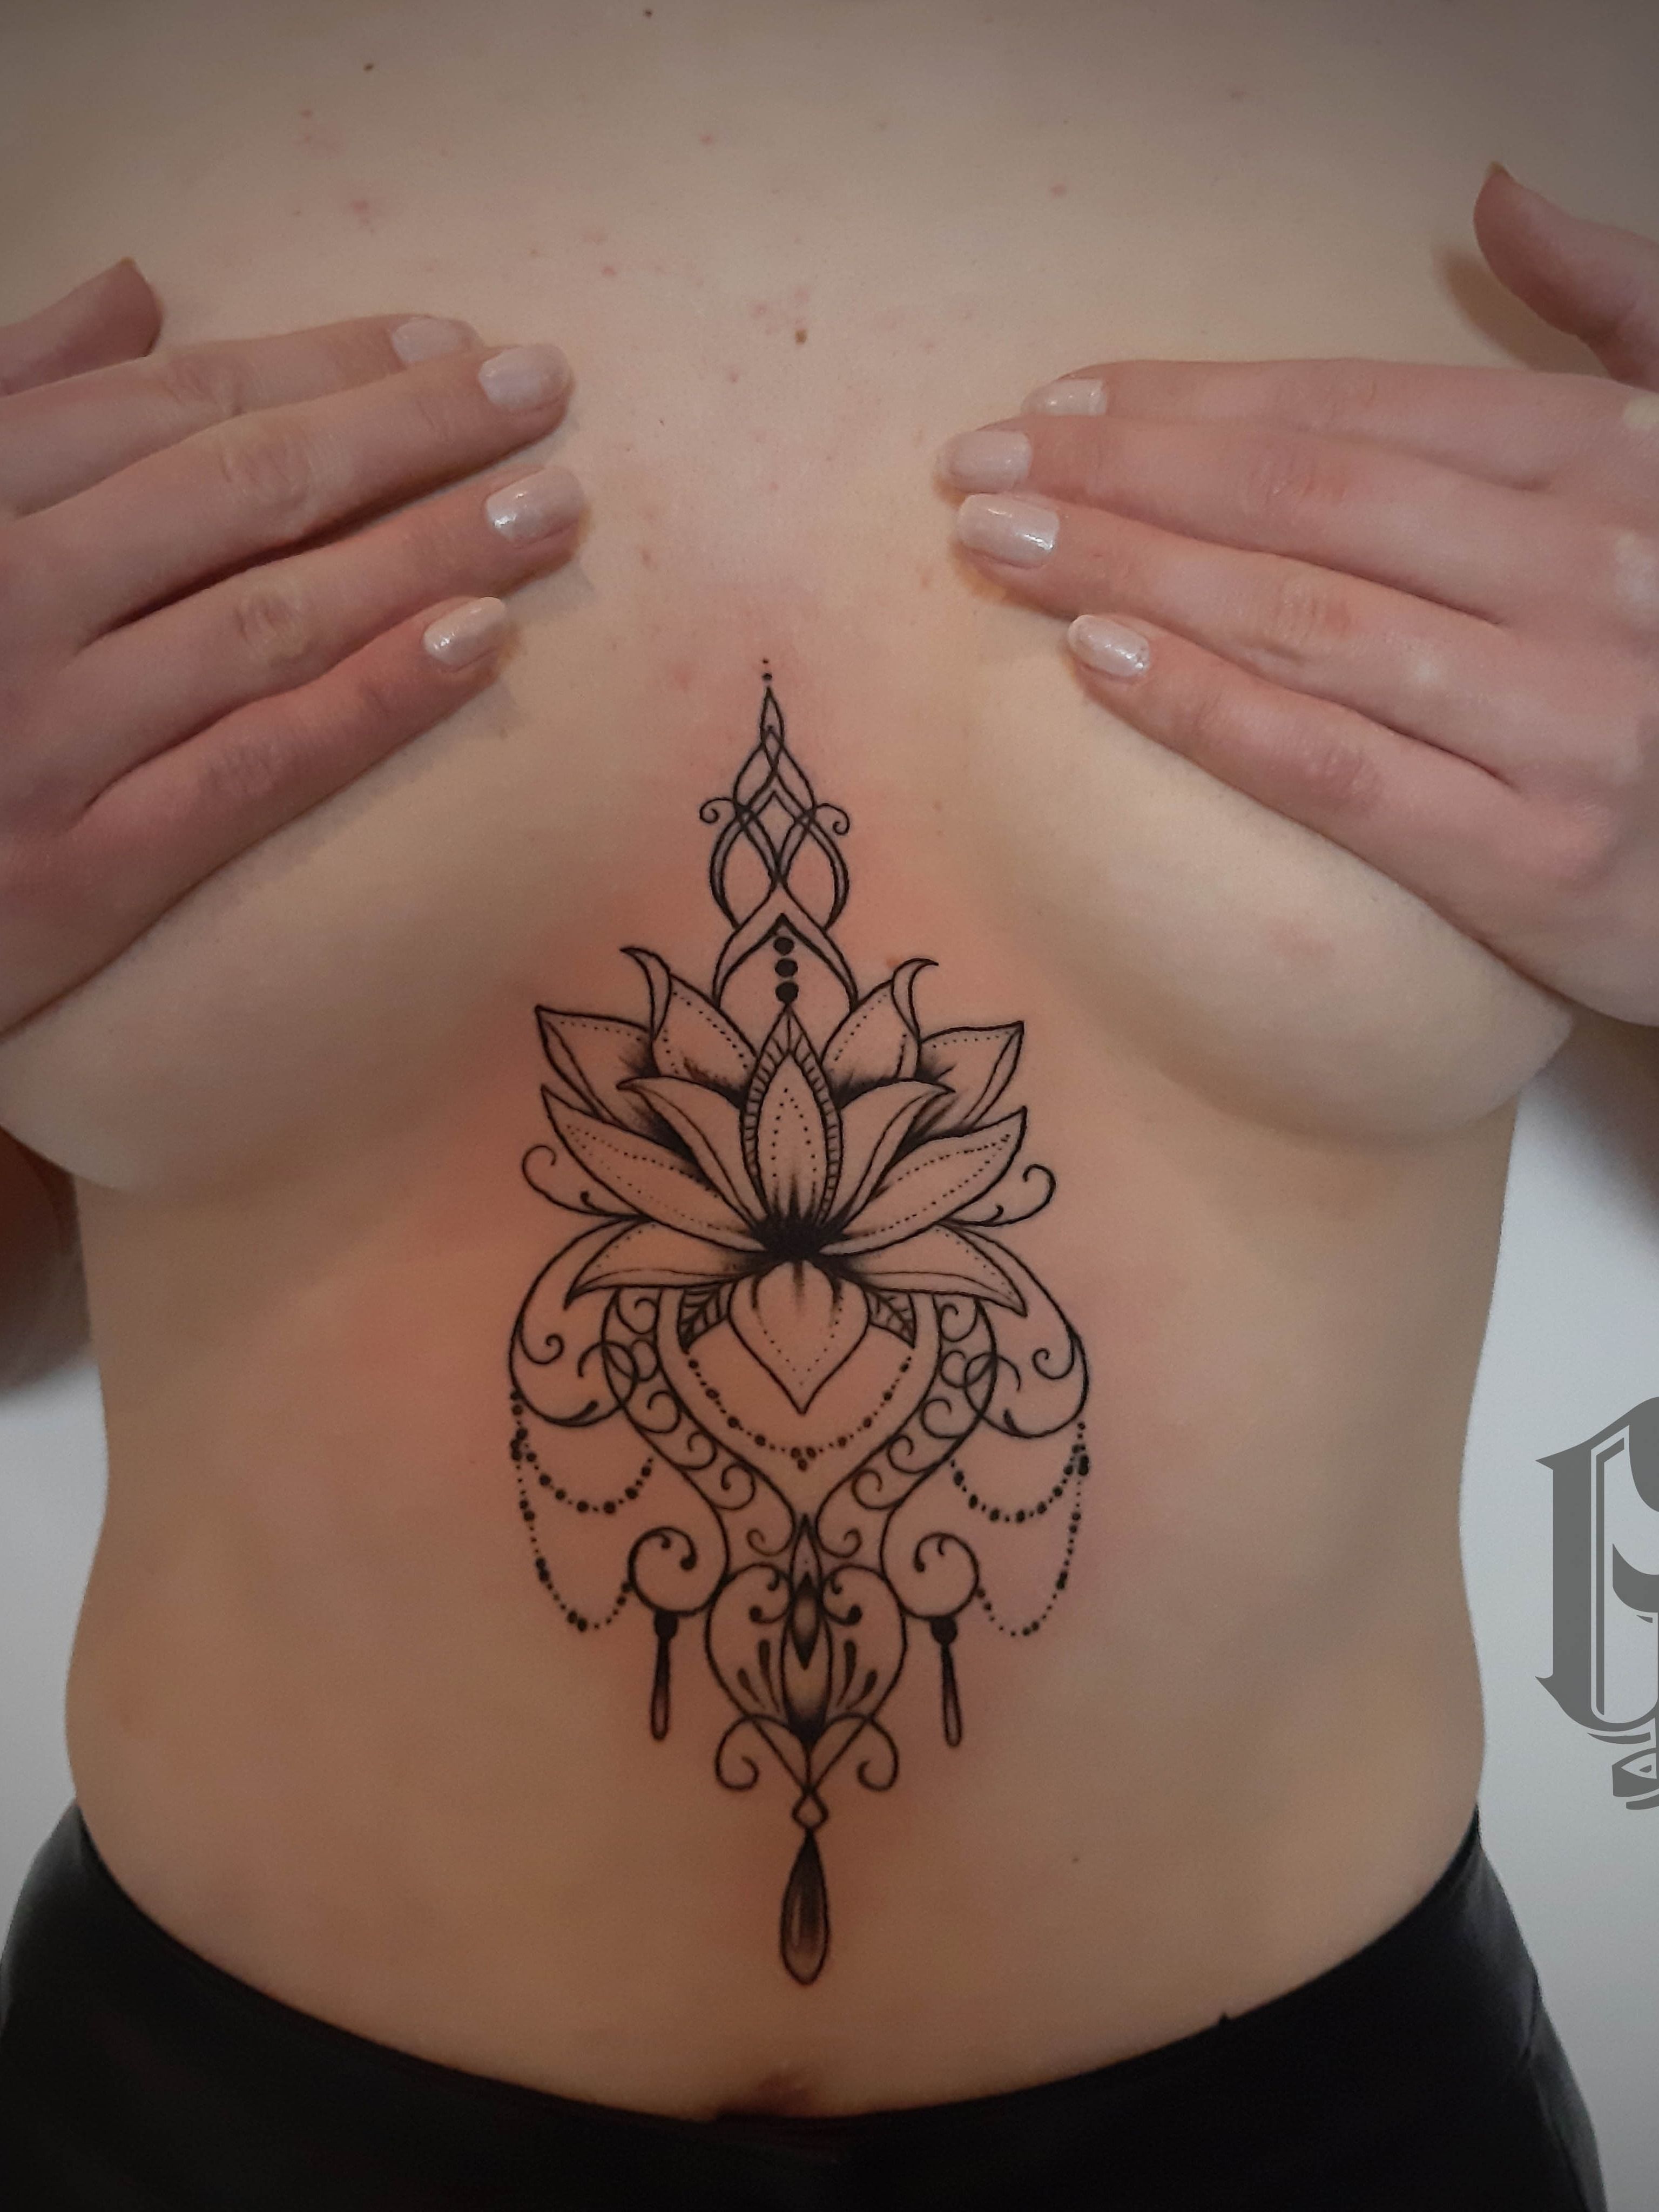 63 Attractive Underboob Tattoos With Meaning  Our Mindful Life